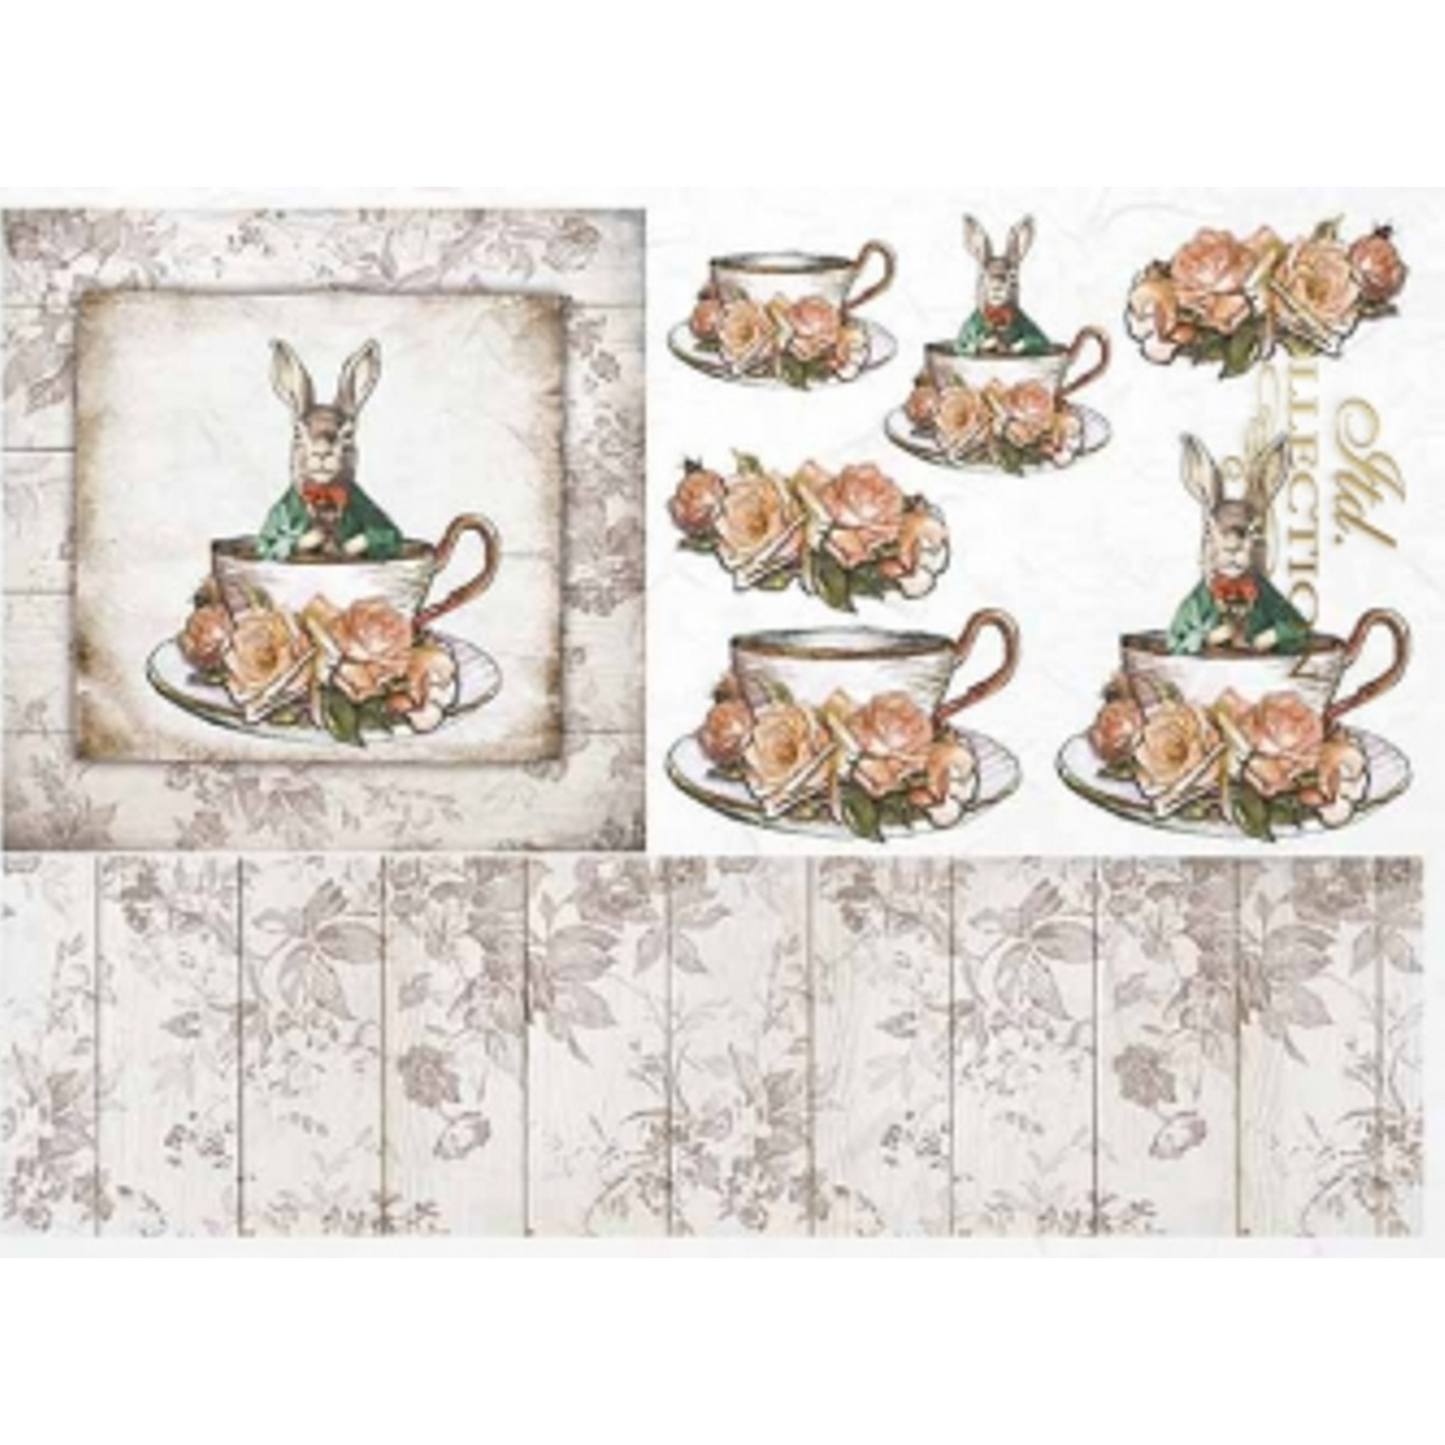 "Gentleman Teacu Bunny" decoupage rice paper by ITD Collection. Size A4 available at Milton's Daughter.